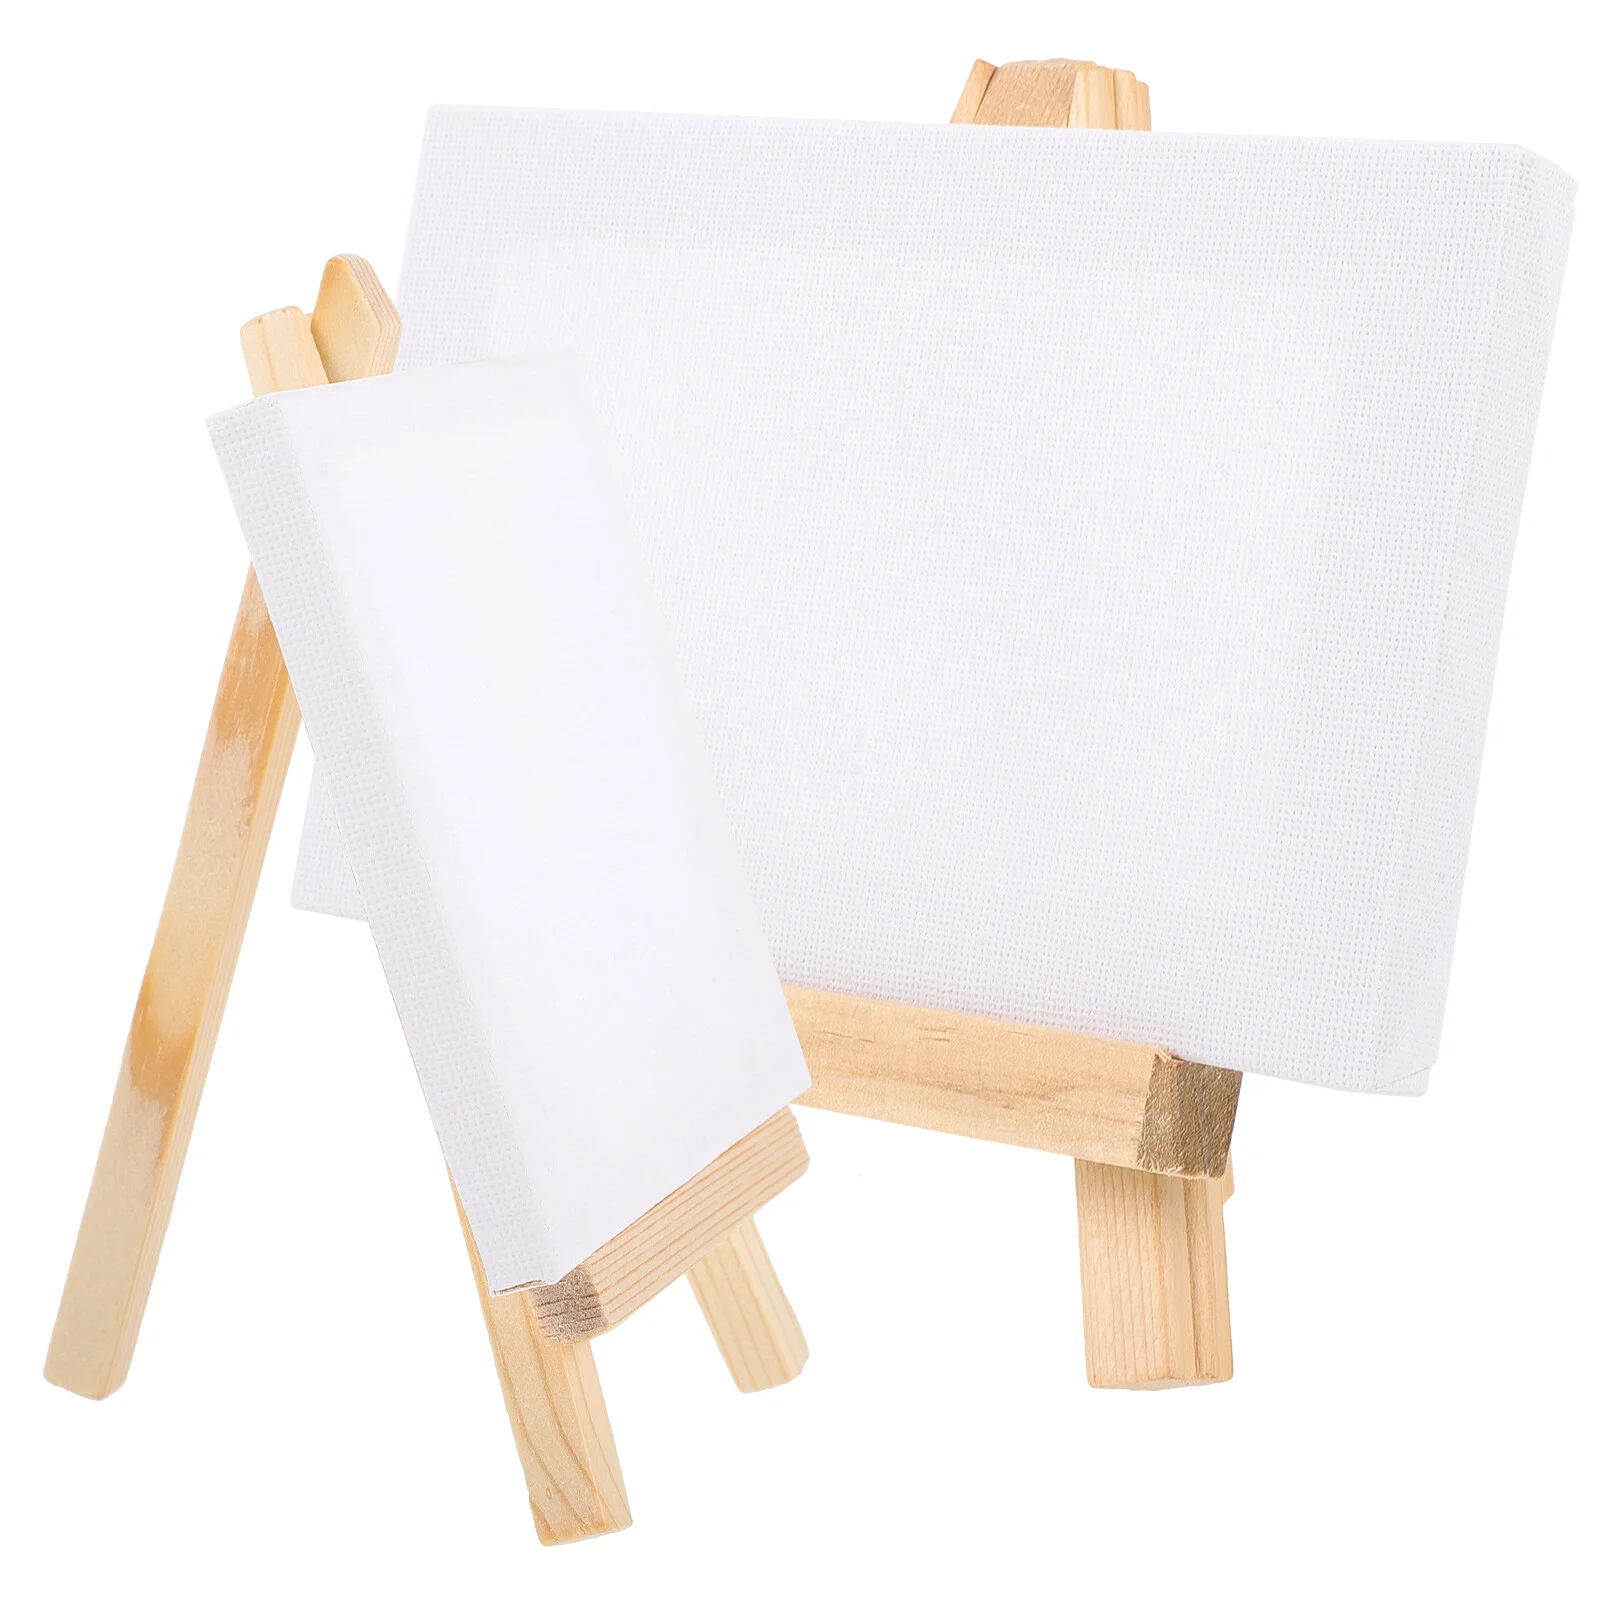 

2 Sets House Canvas Stand Multi-function Painting Easel DIY Accessories Blank Crafted Mini Wooden Delicate Child Small Tiny